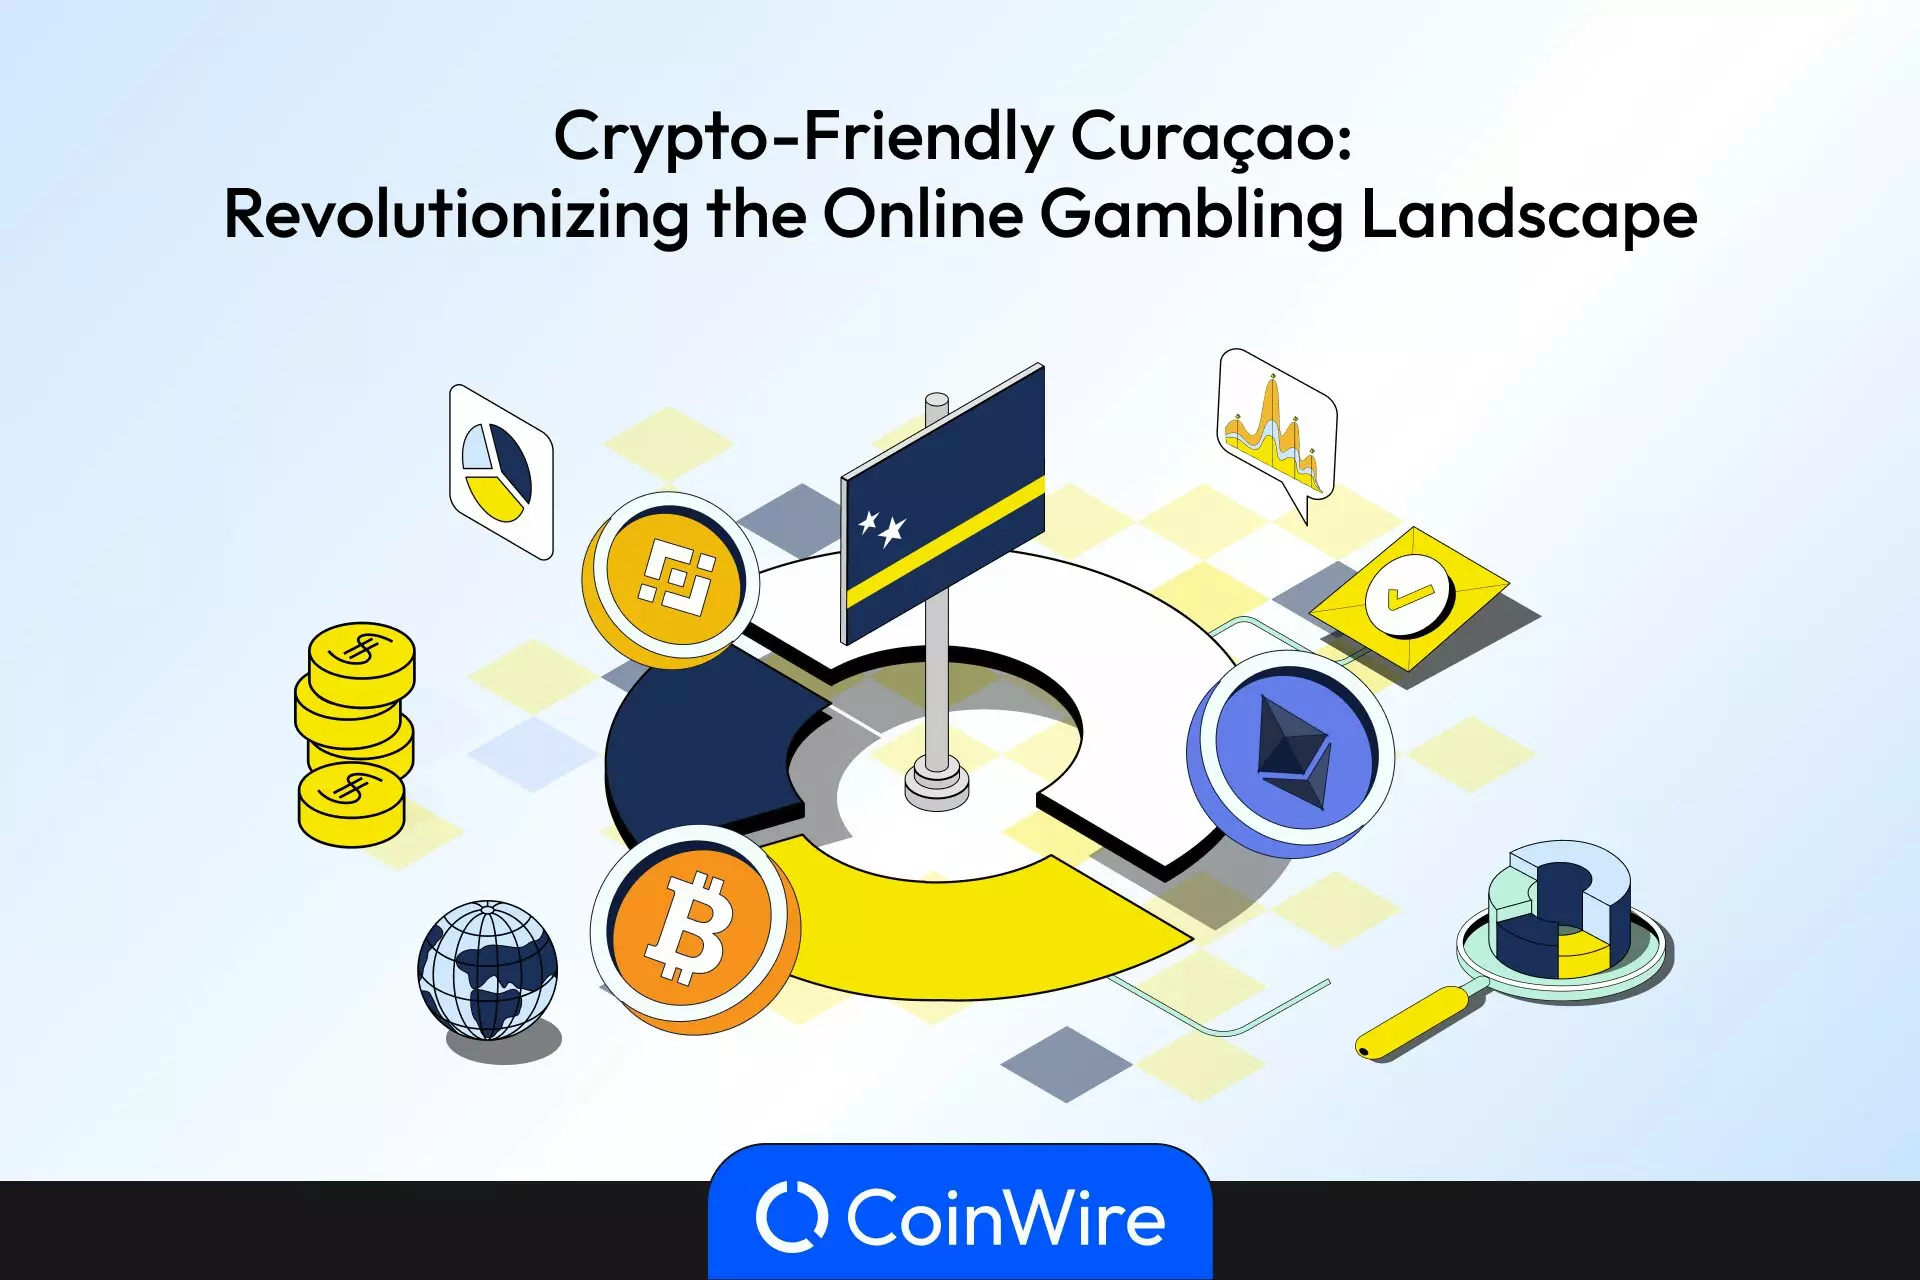 Crypto-Friendly Curacao: Revolutionizing The Online Gambling Landscape